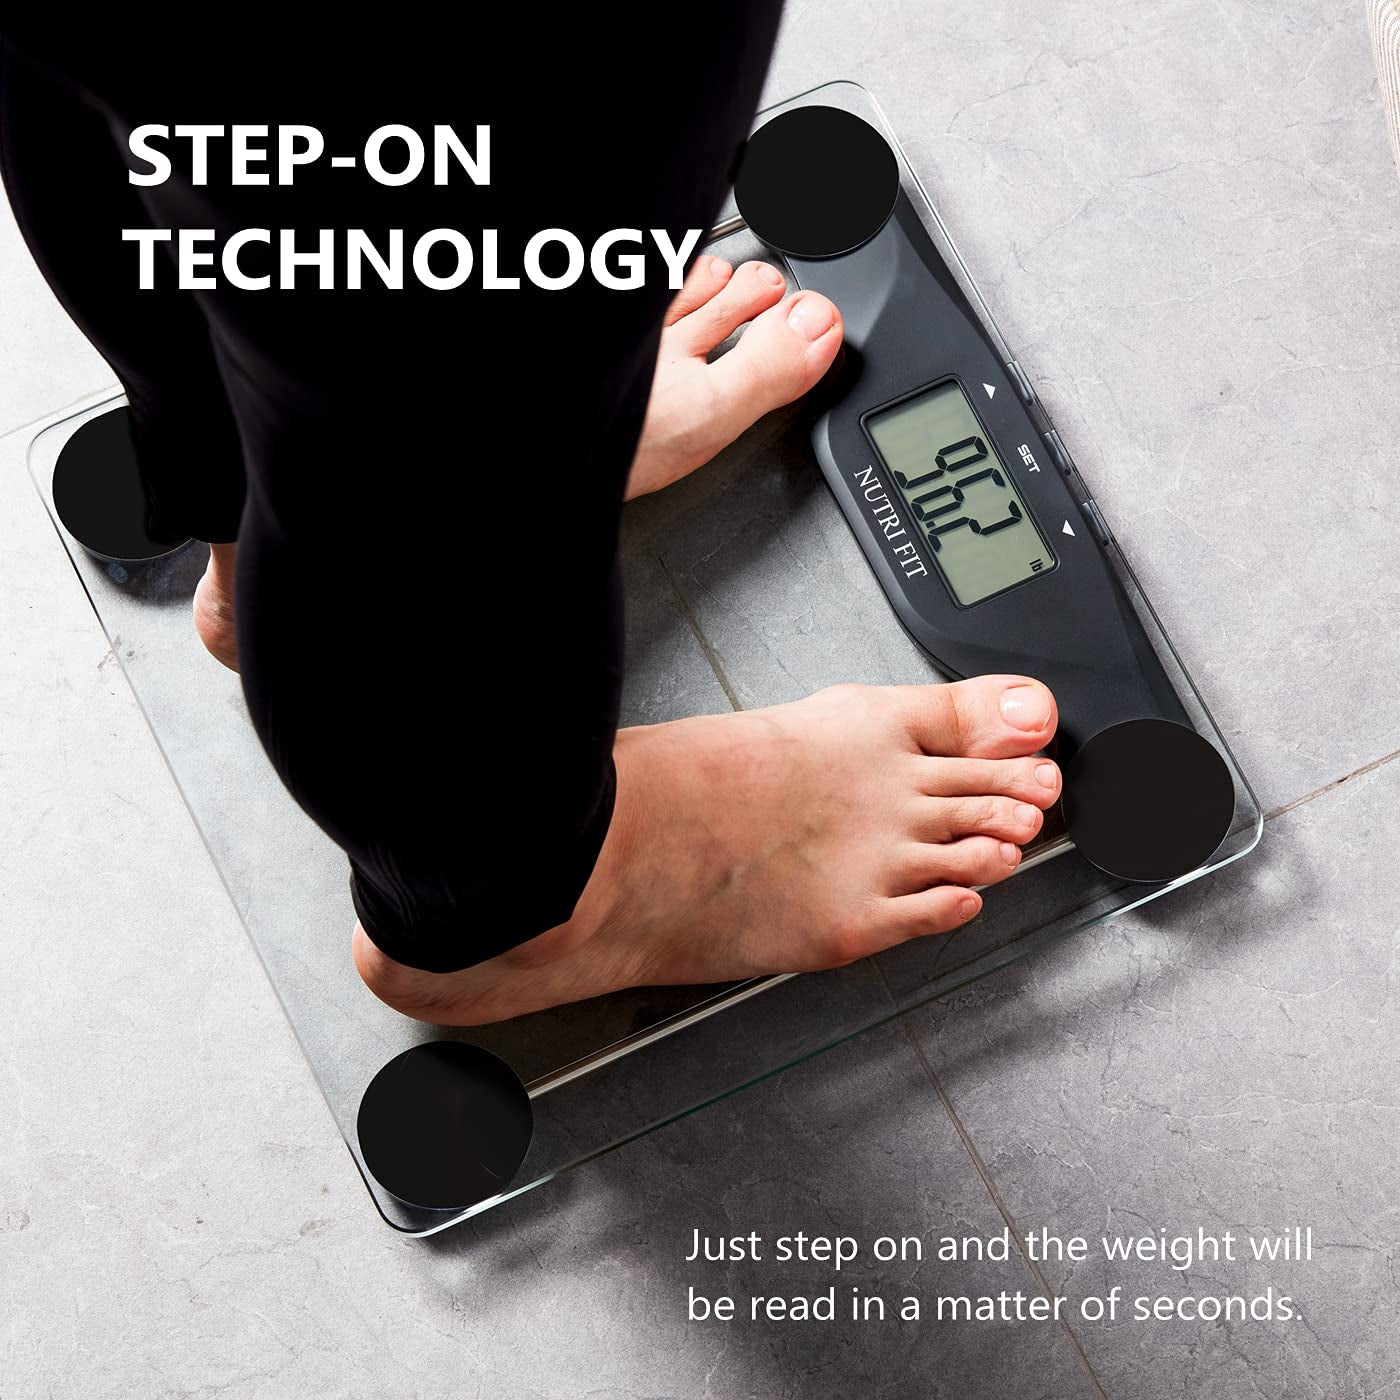 Professional title: "Digital BMI Scale with Body Mass Index Analysis, 400 Lbs Capacity, Large Backlight Display - Black"